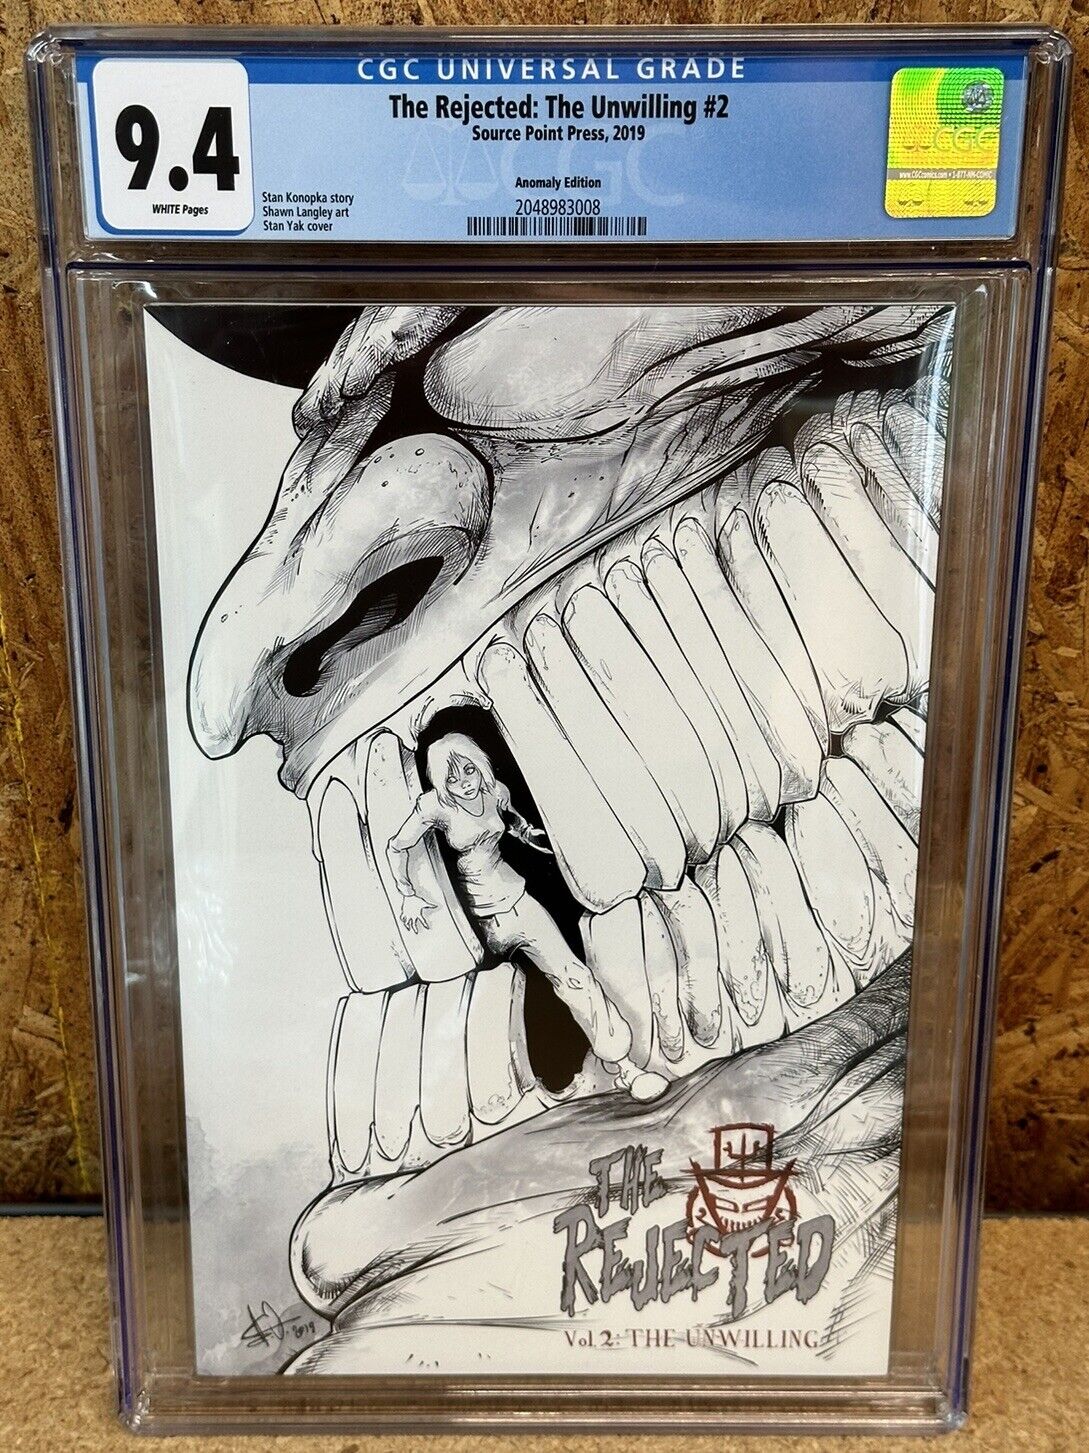 THE REJECTED VOL 2 THE UNWILLING STAN YAK TRADE DRESS VARIANT CGC 9.4 LTD 50